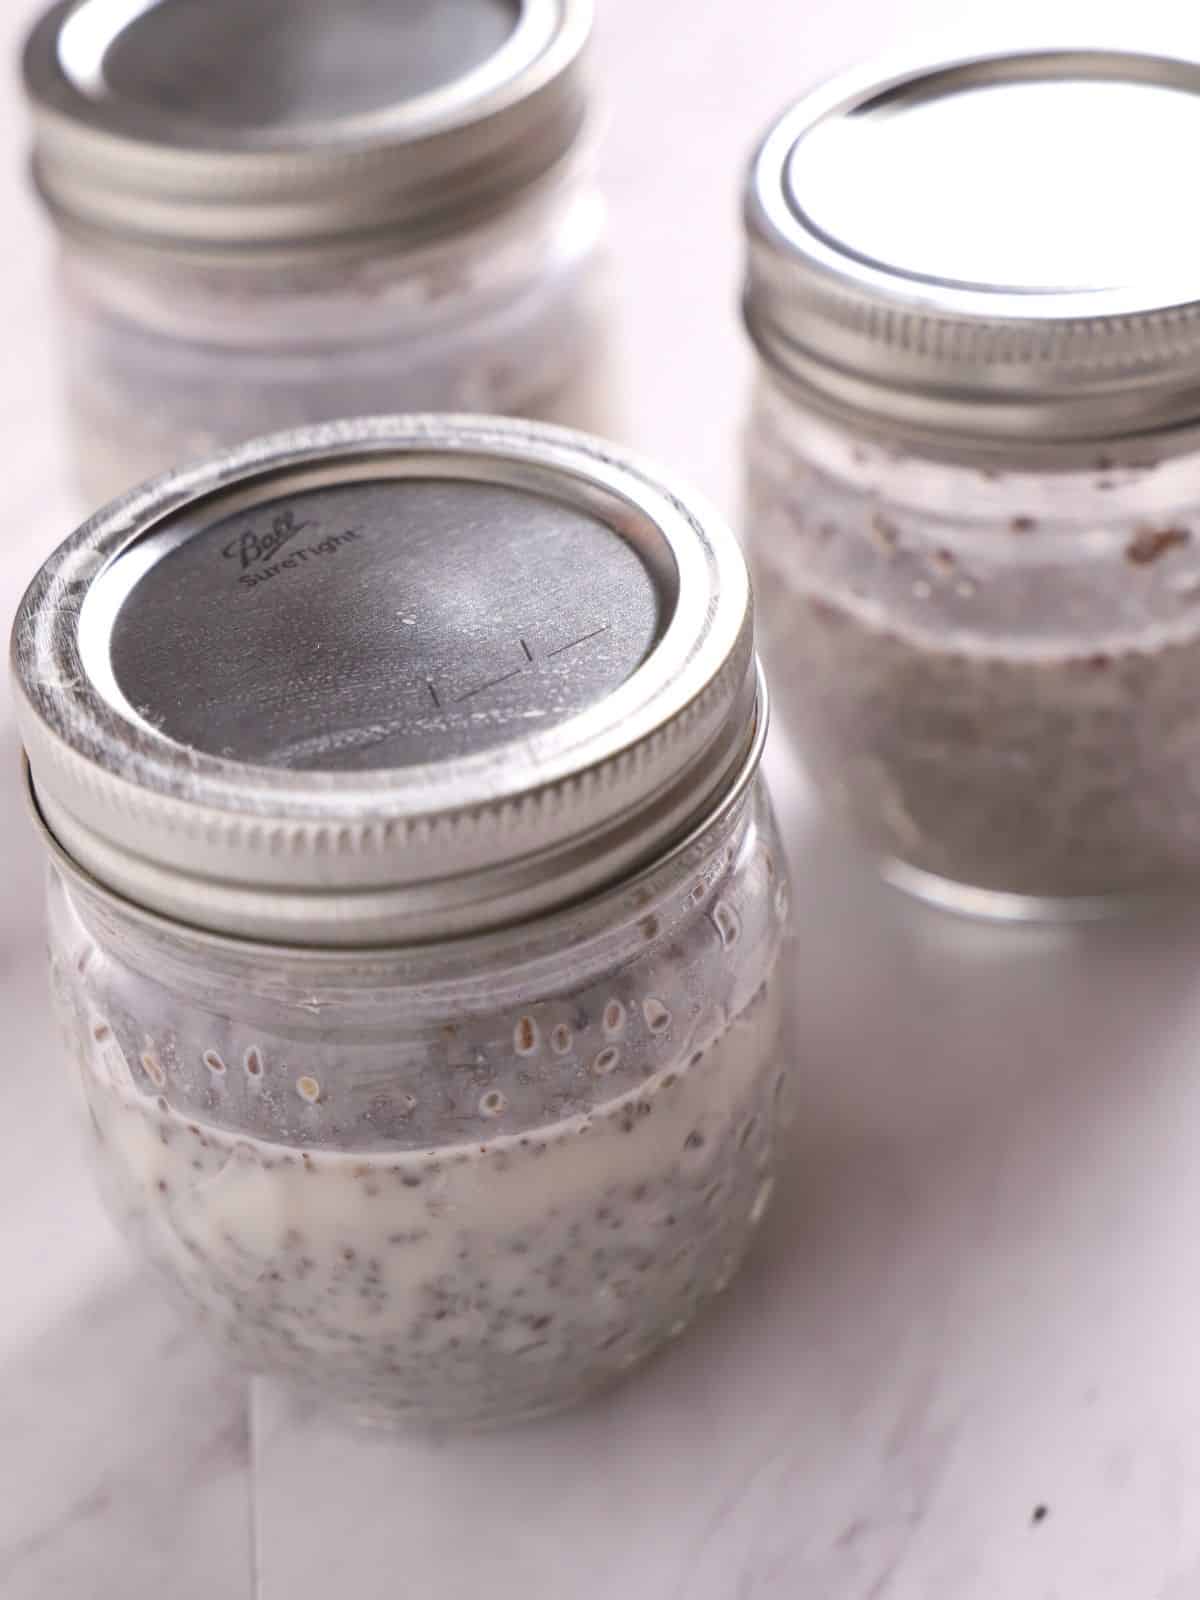 Chia pudding in Mason jars with lids on.